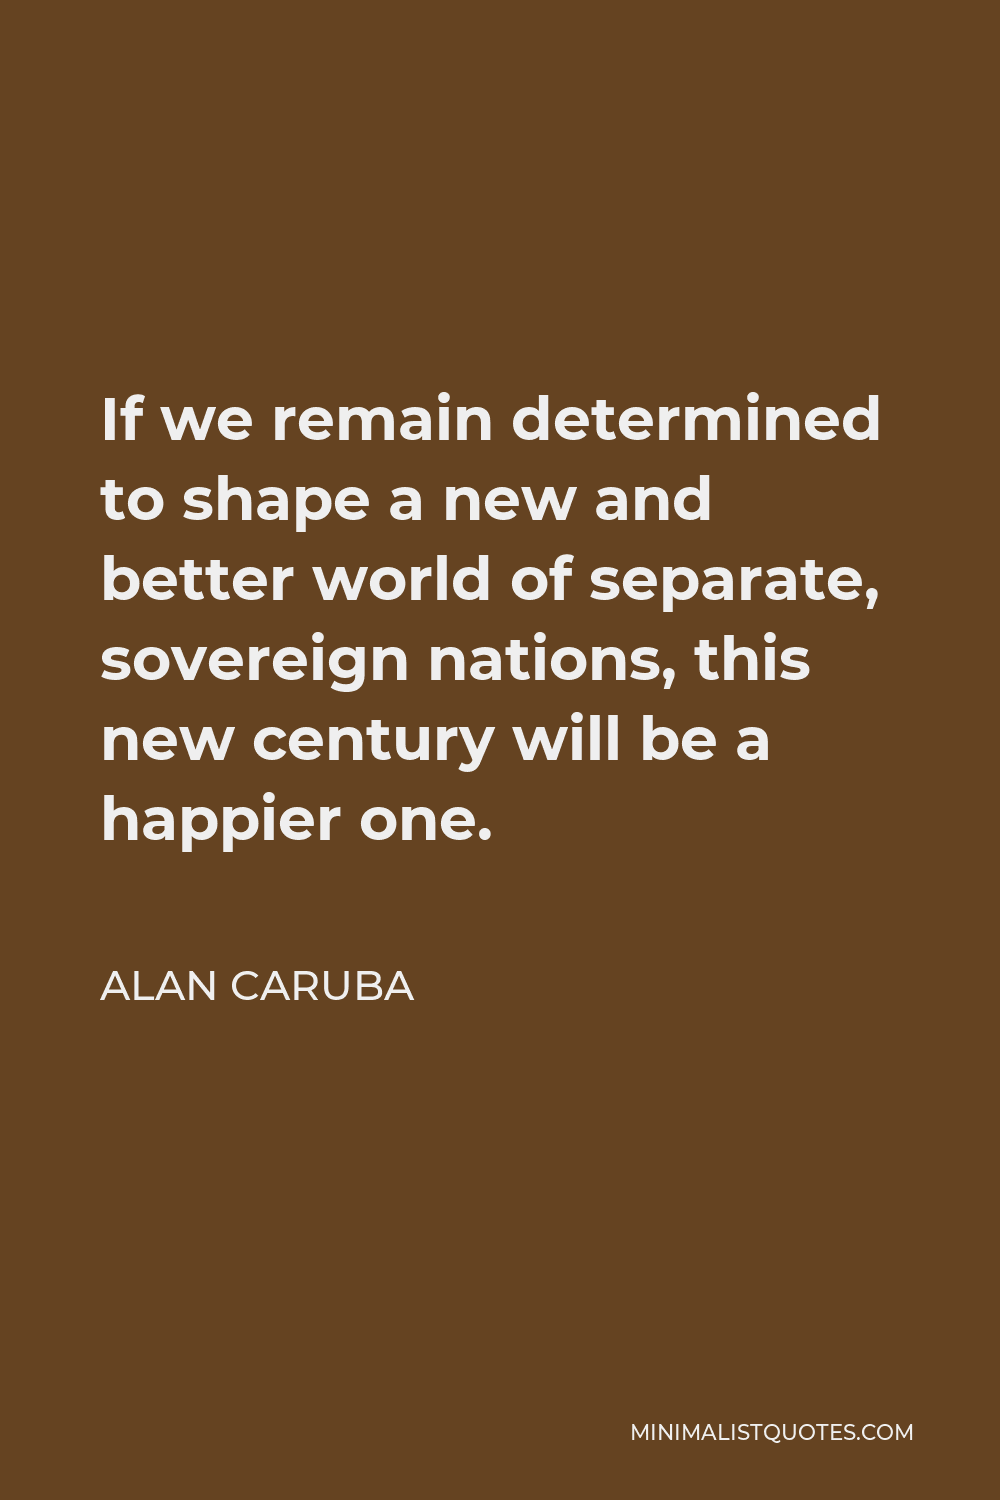 Alan Caruba Quote - If we remain determined to shape a new and better world of separate, sovereign nations, this new century will be a happier one.